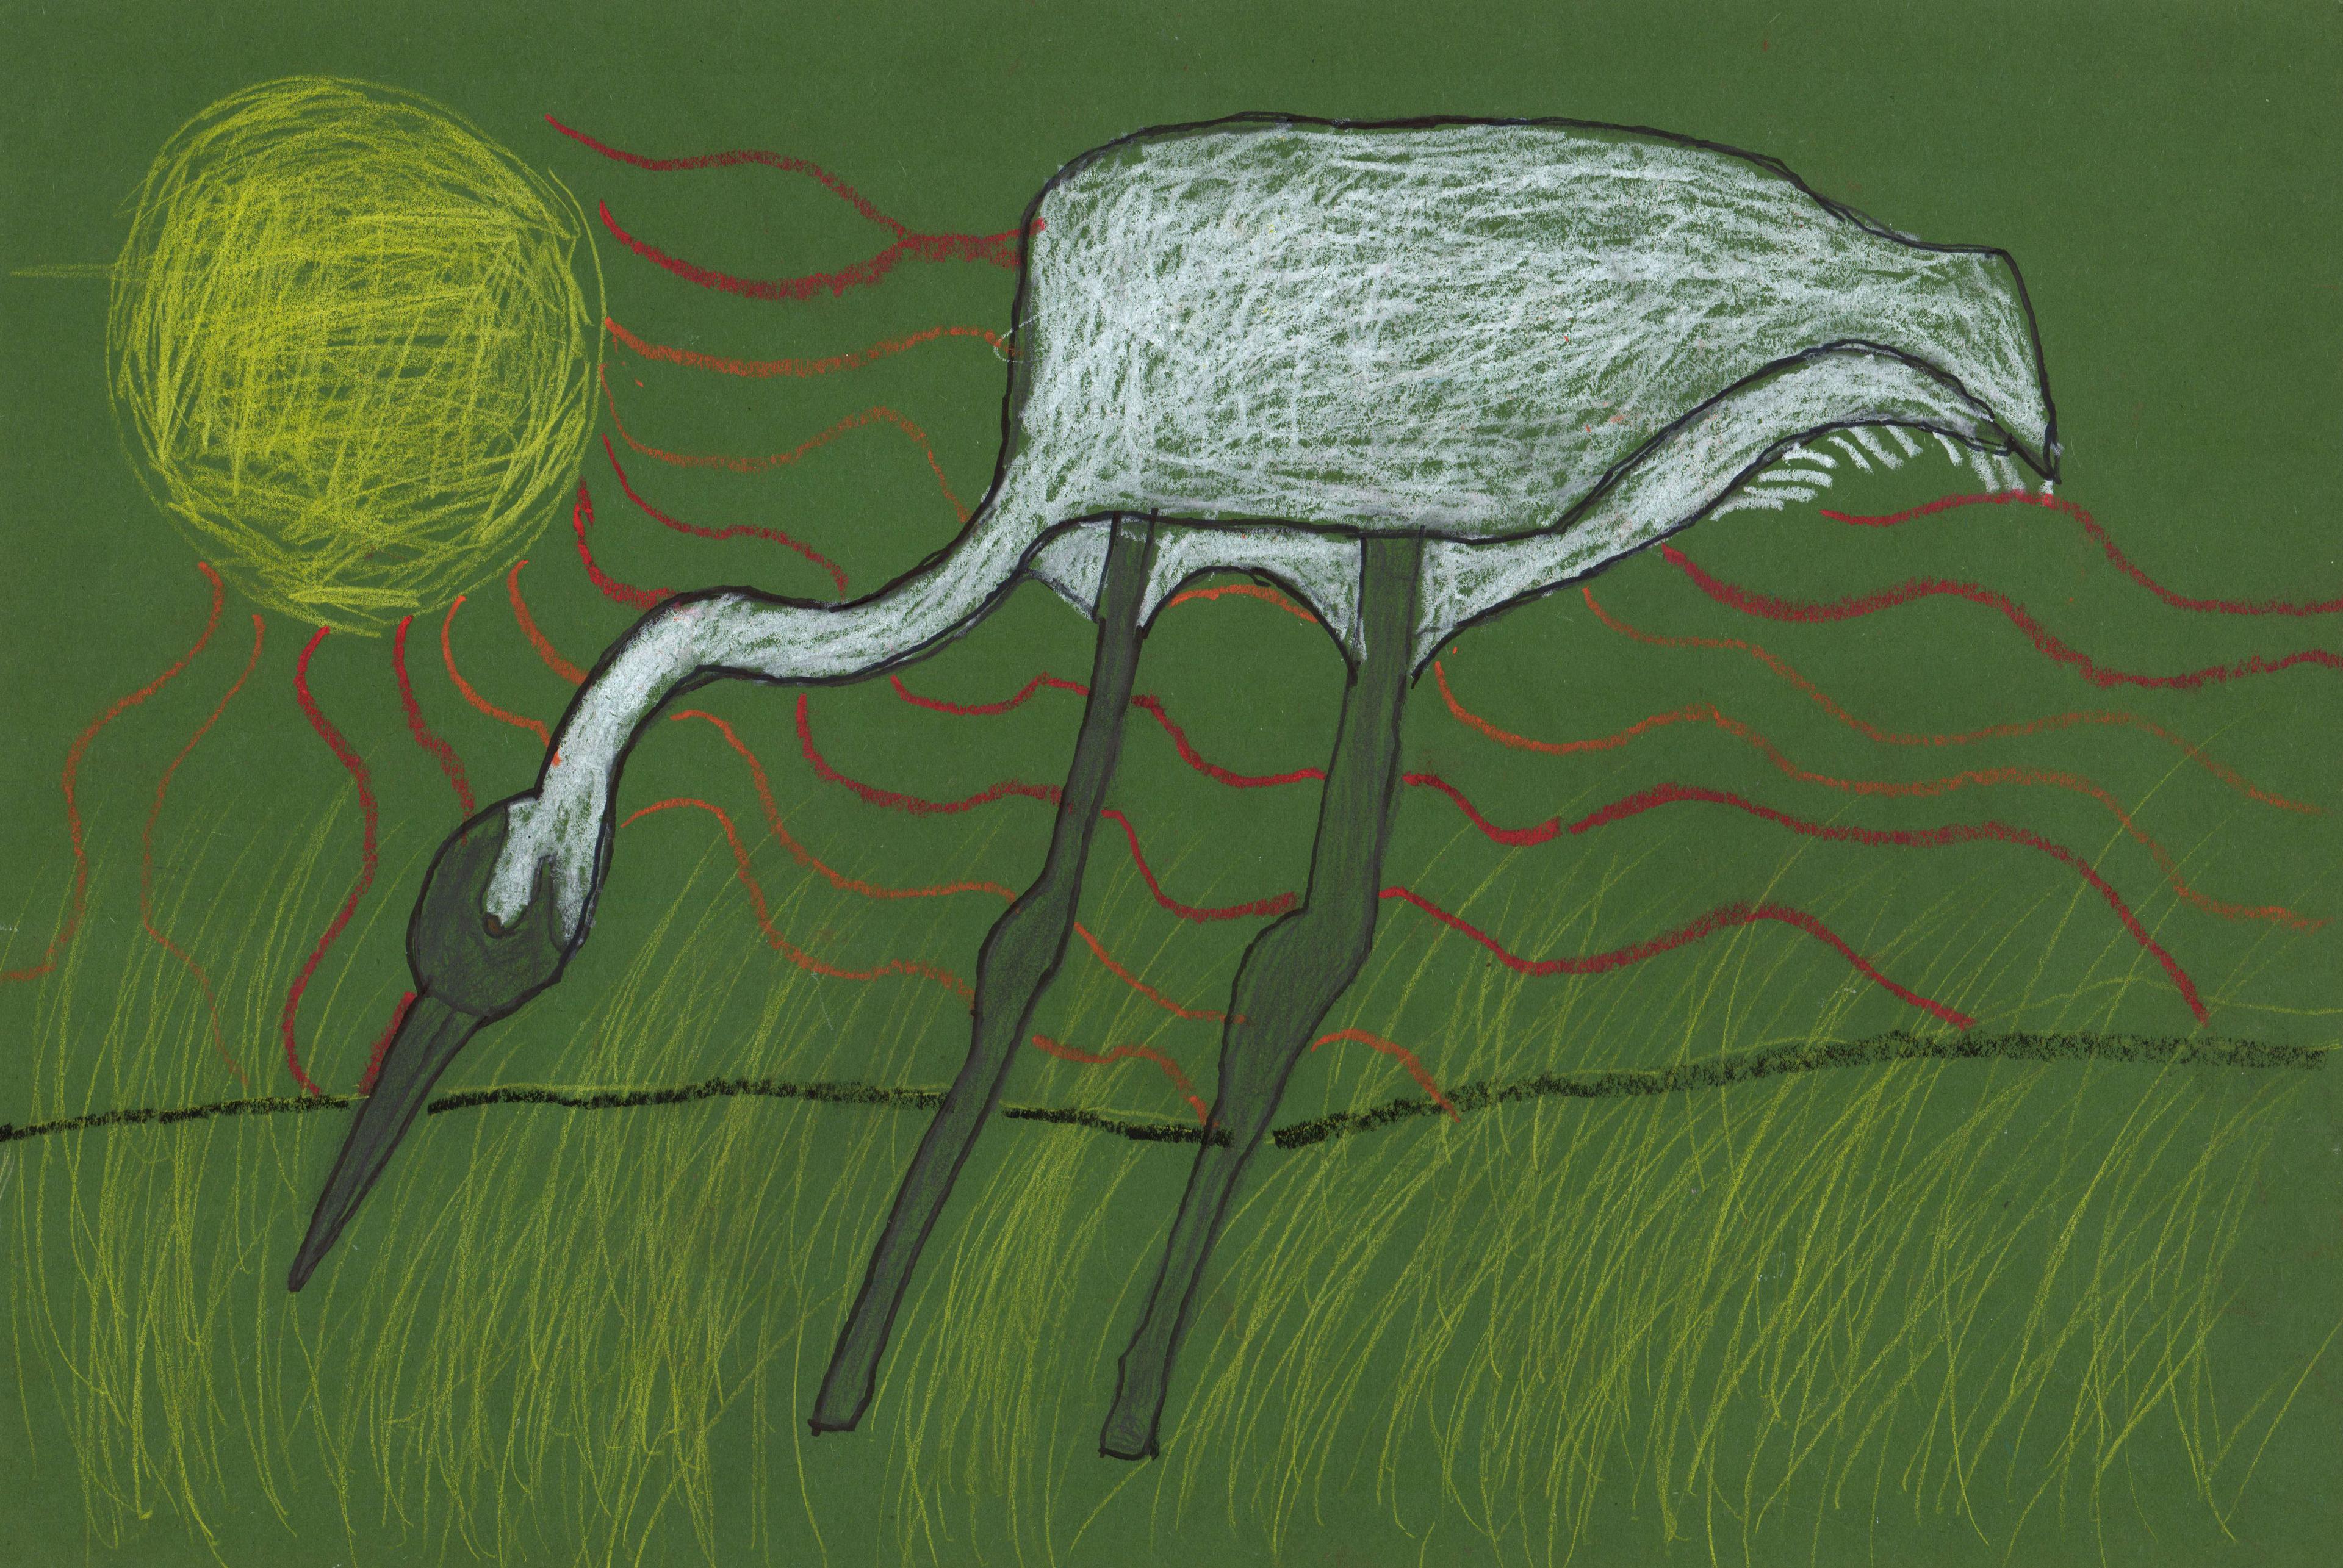 Graphite-and–oil pastel drawing of white crane with a dark beak and dark thin legs standing in a field of green grass. Its long neck is bent and its beak is pointed down to the grass. A large yellow sun shines overhead and to the left in a green sky that is the same color as the grass.